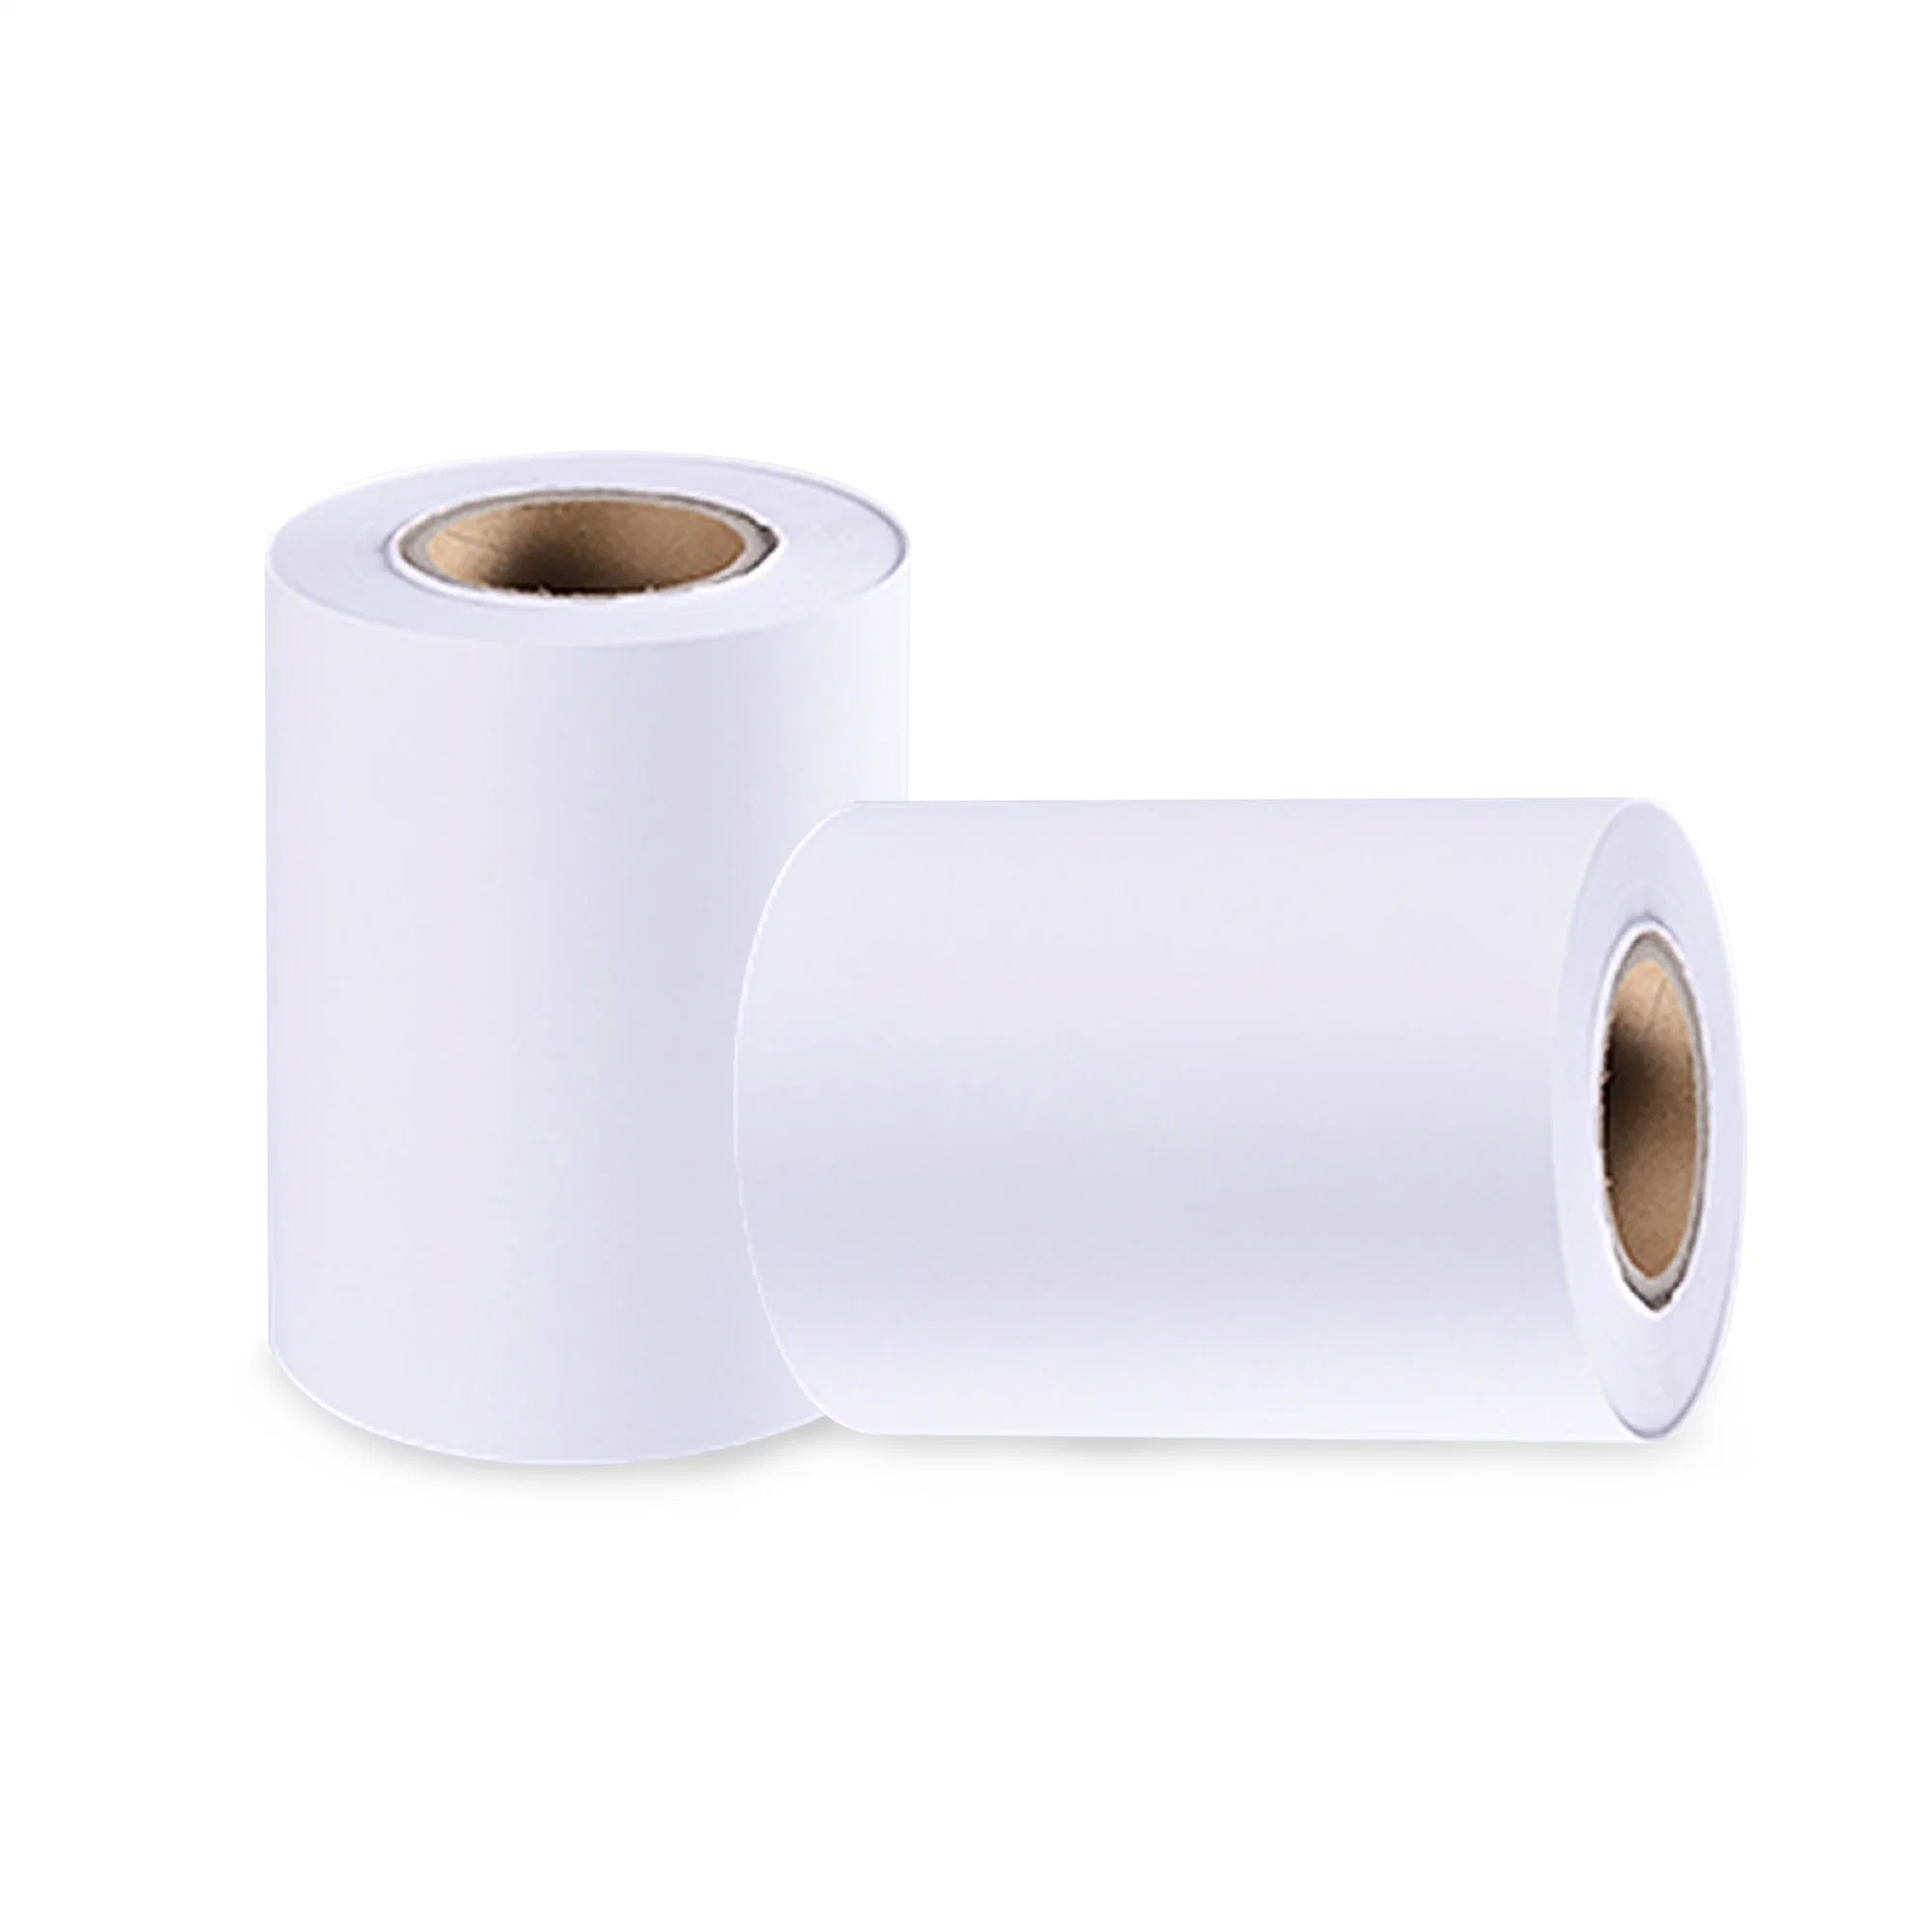 Self Adhesive Direct Thermal Label Material in Jumbo Roll for Shipping Labels